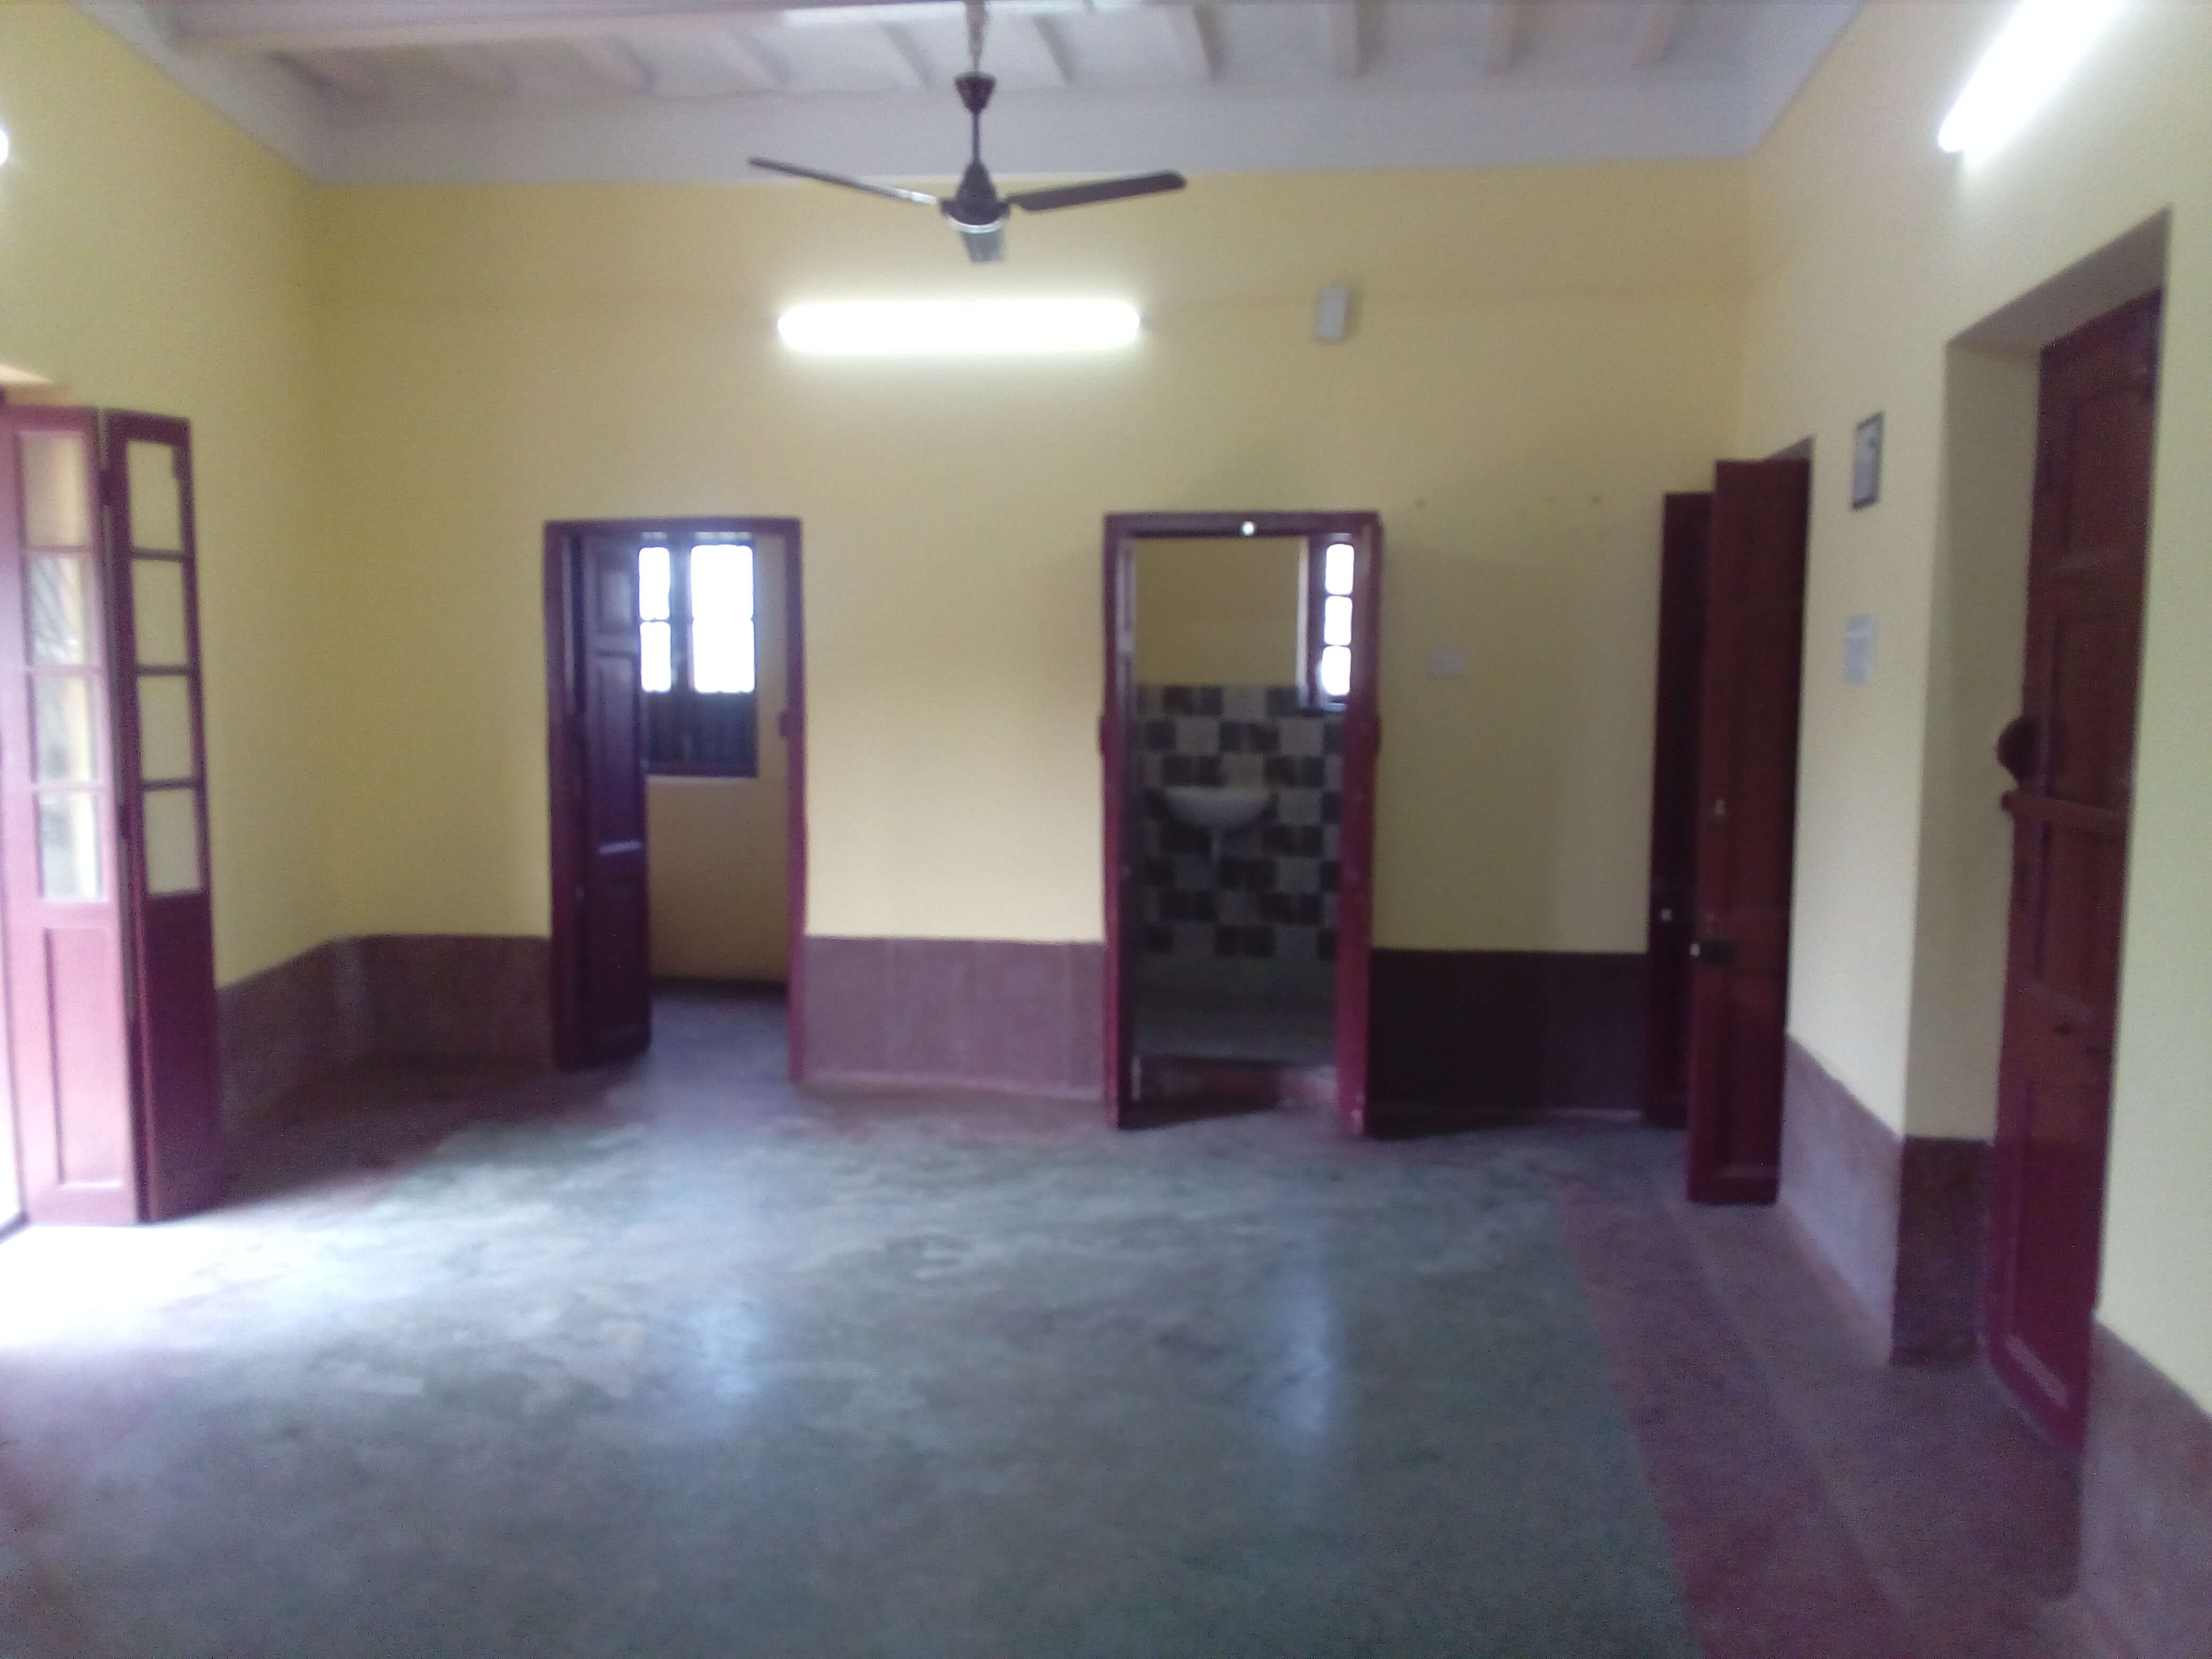 Office For Rent in Bhawanipore,Kolkata (Id:22111)